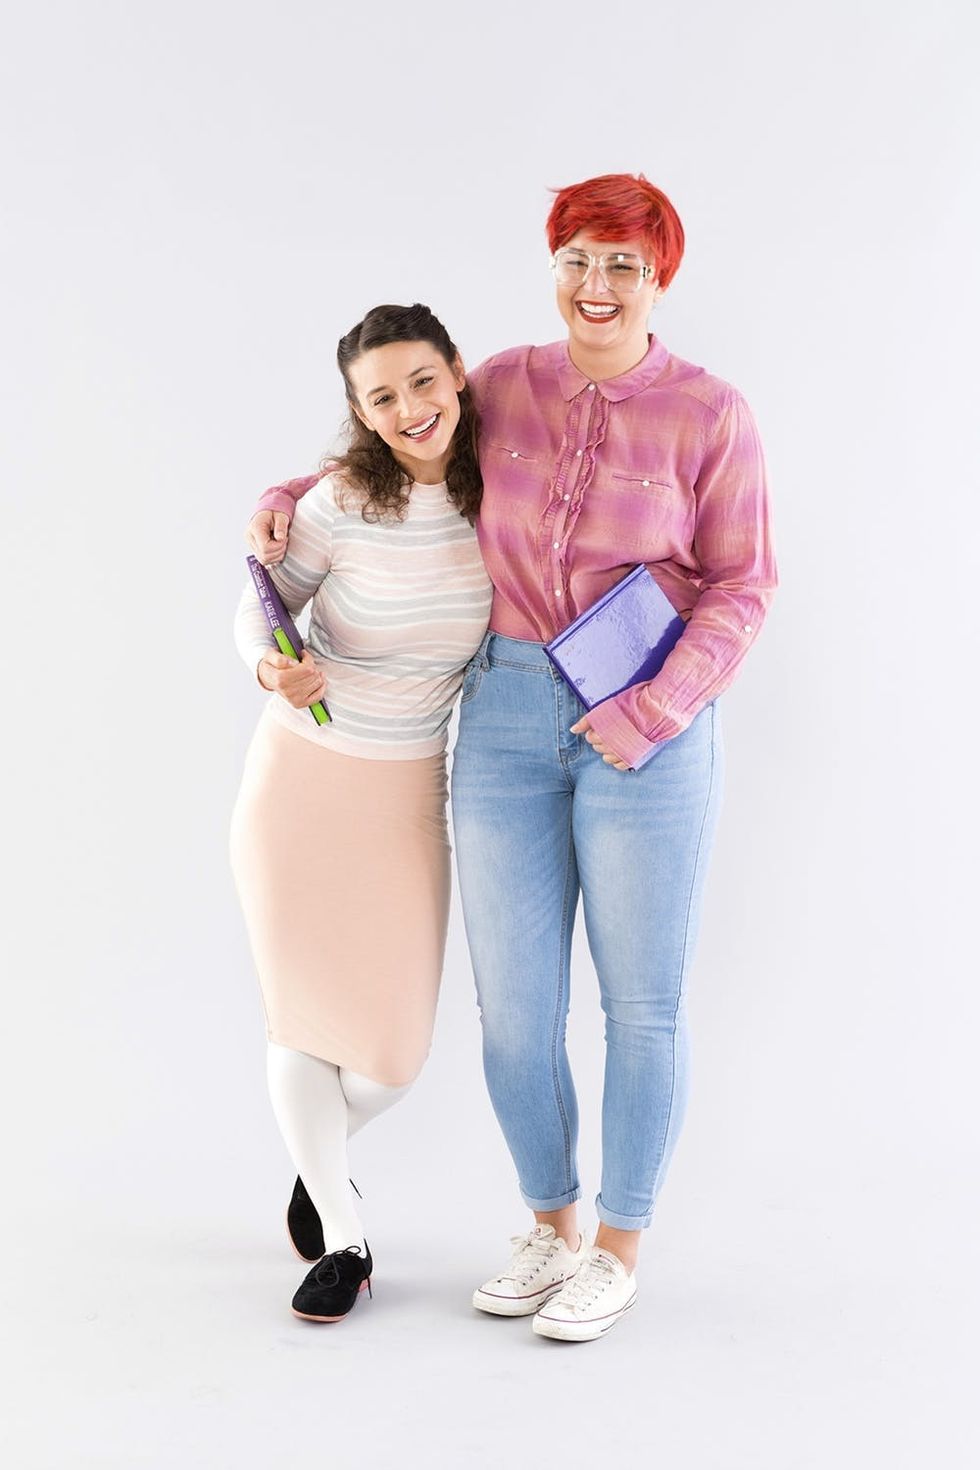 Barb and Nancy from Stranger Things DIY Couples' Costume